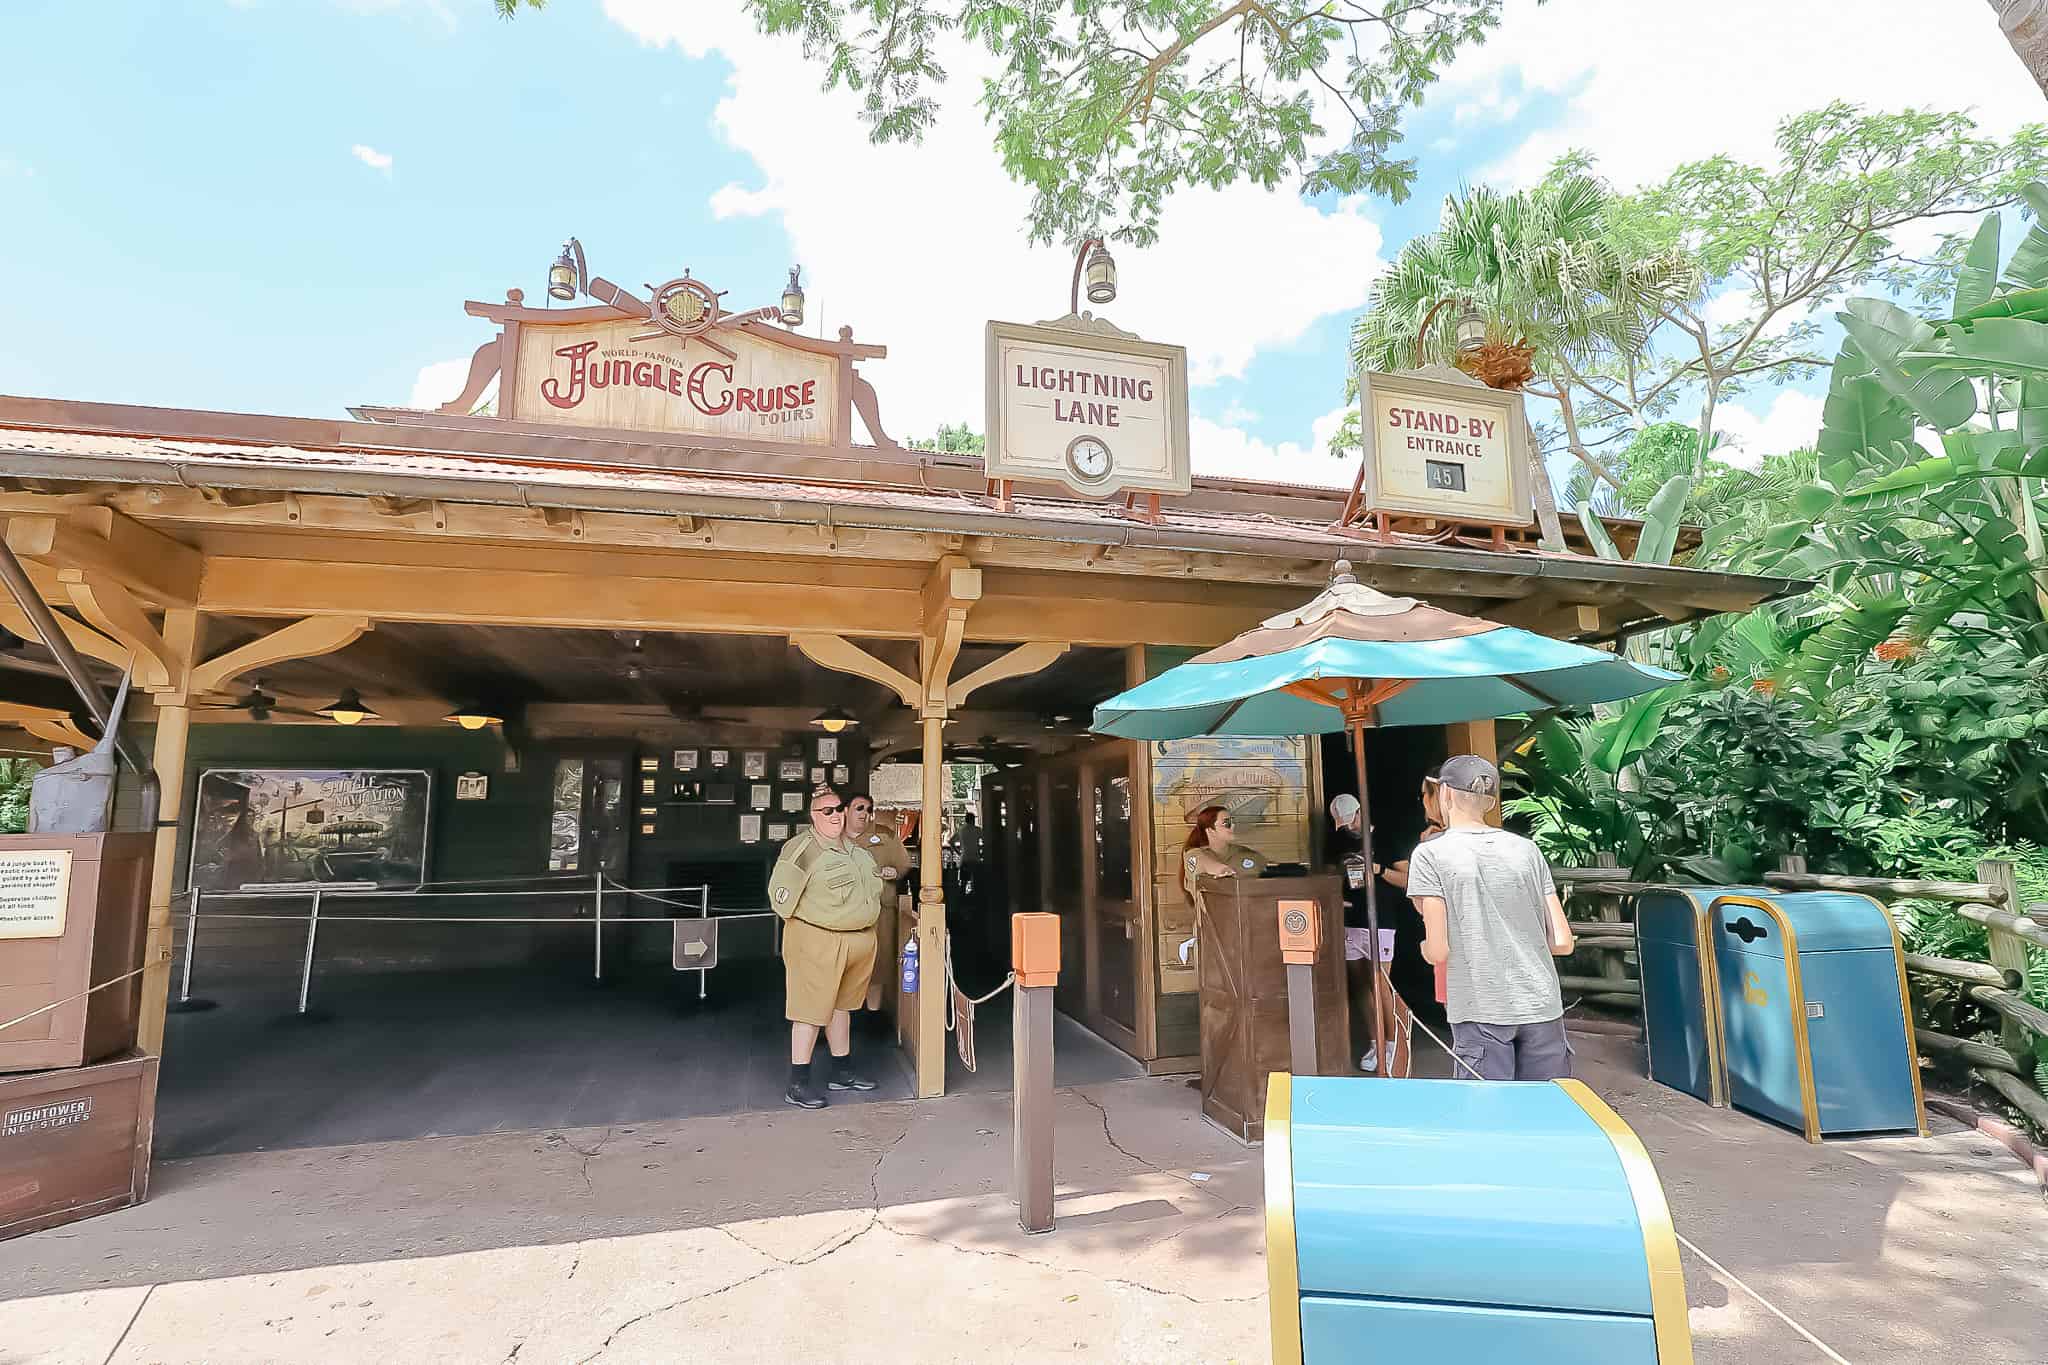 stand-by entrance and Lightning Lane entrance for Magic Kingdom's Jungle Cruise 